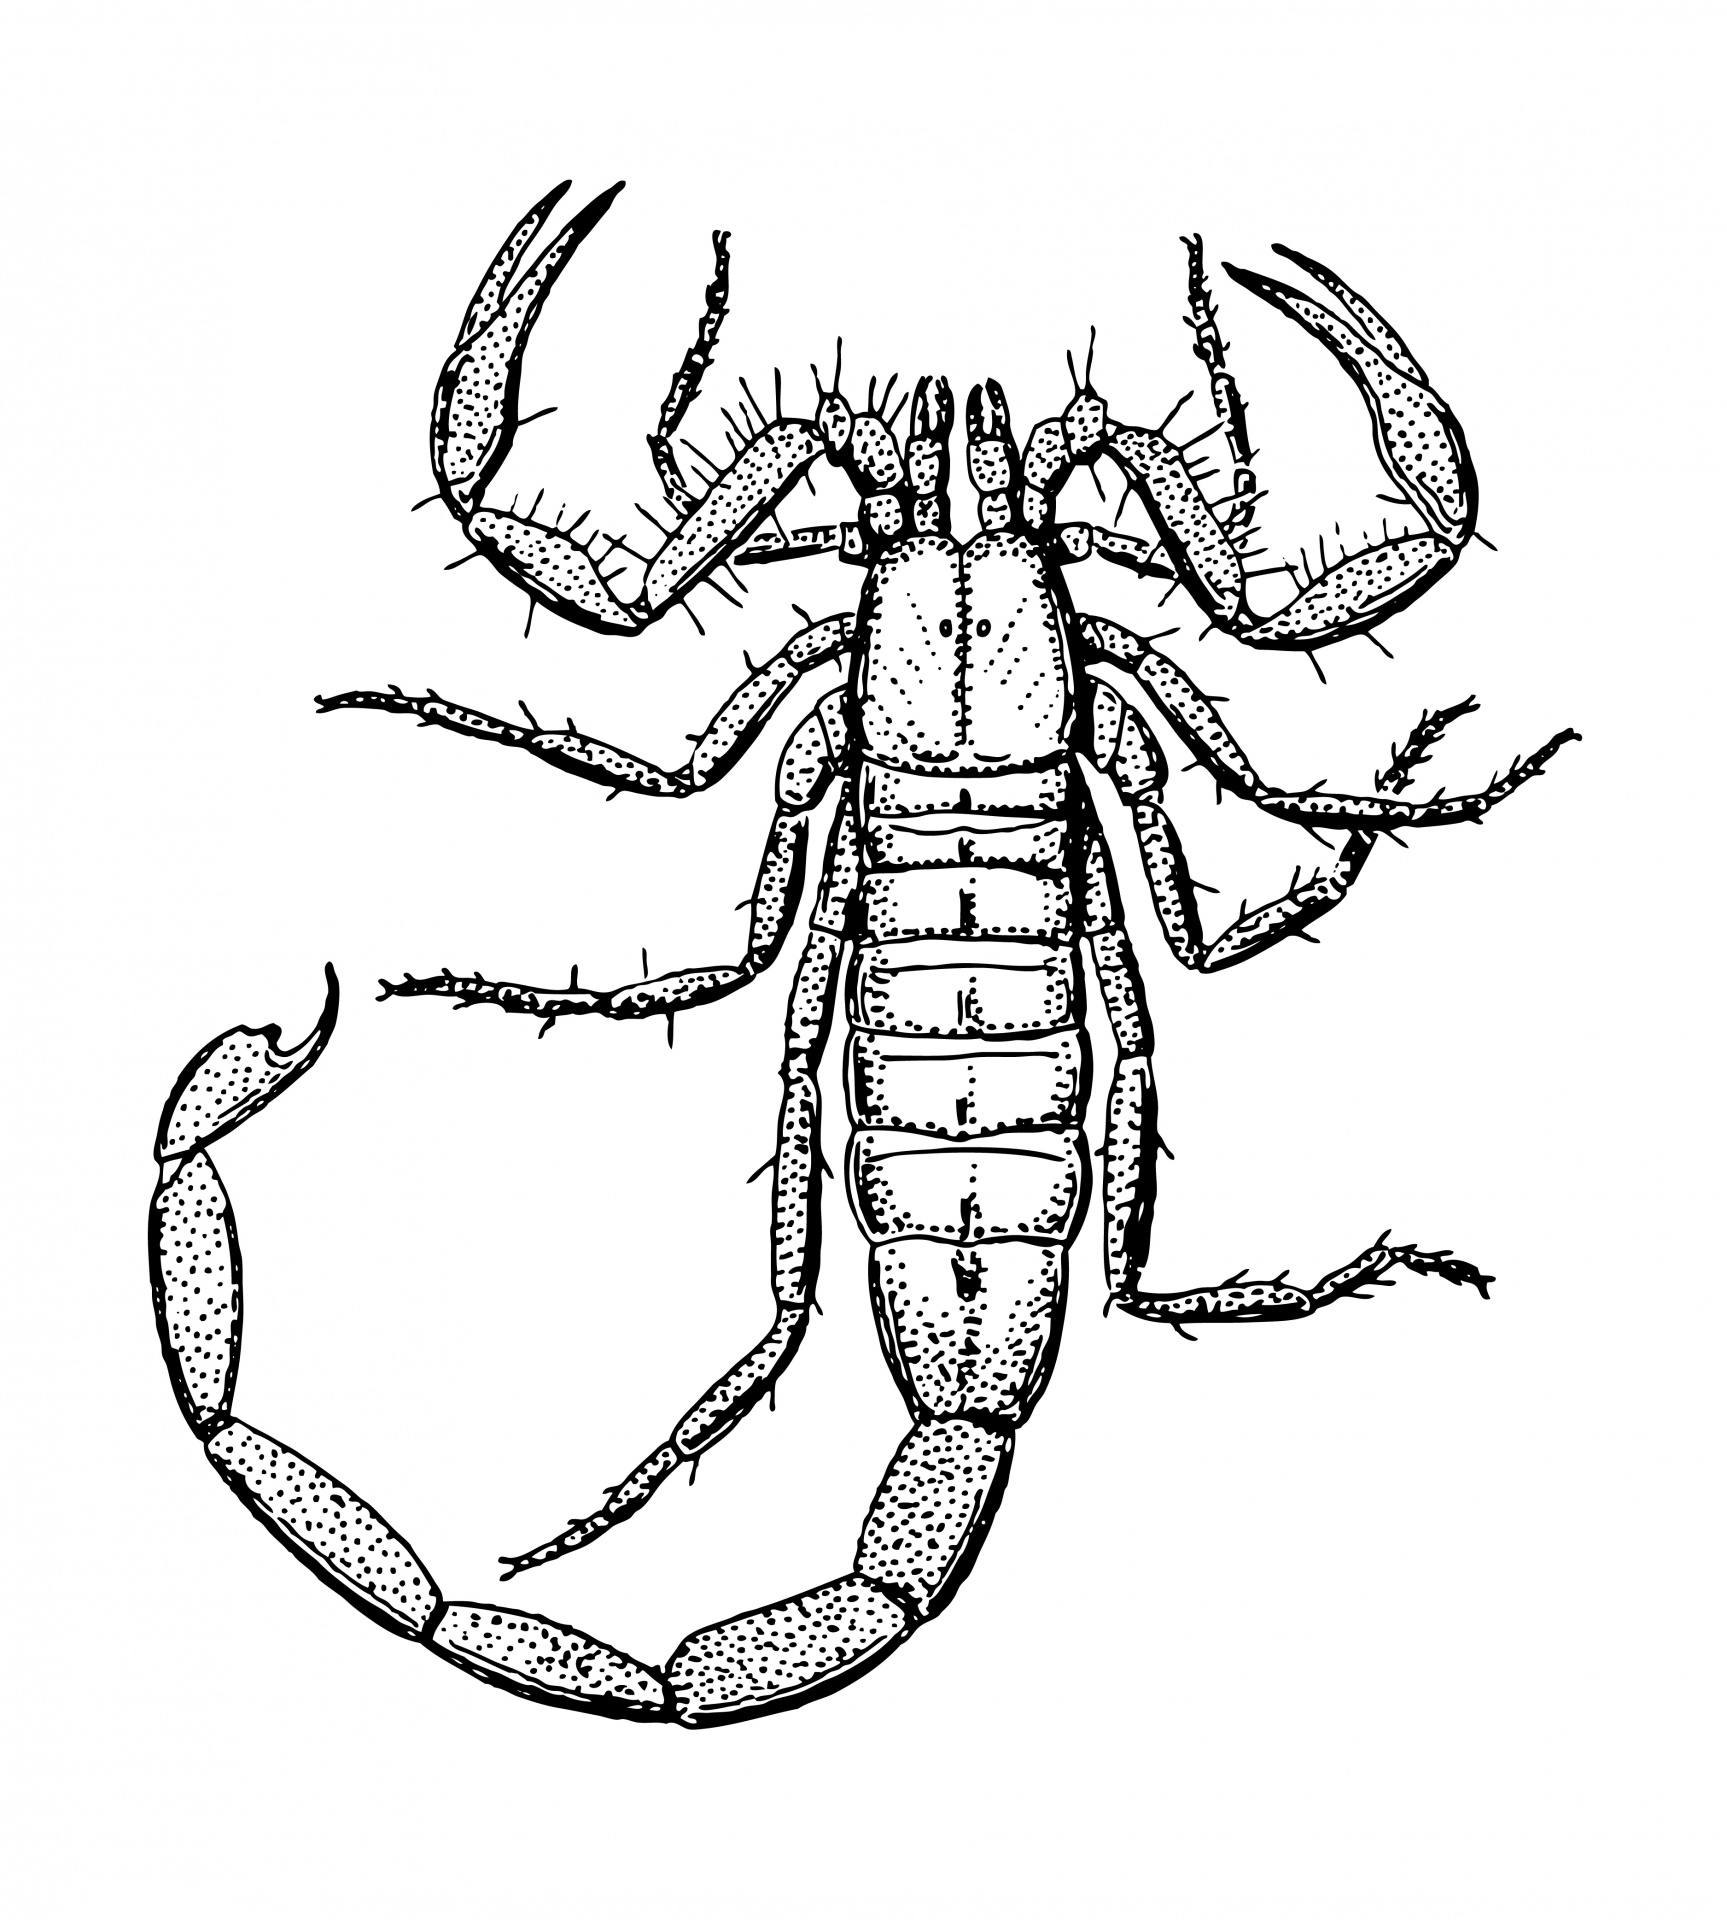 Scorpion clipart #4, Download drawings